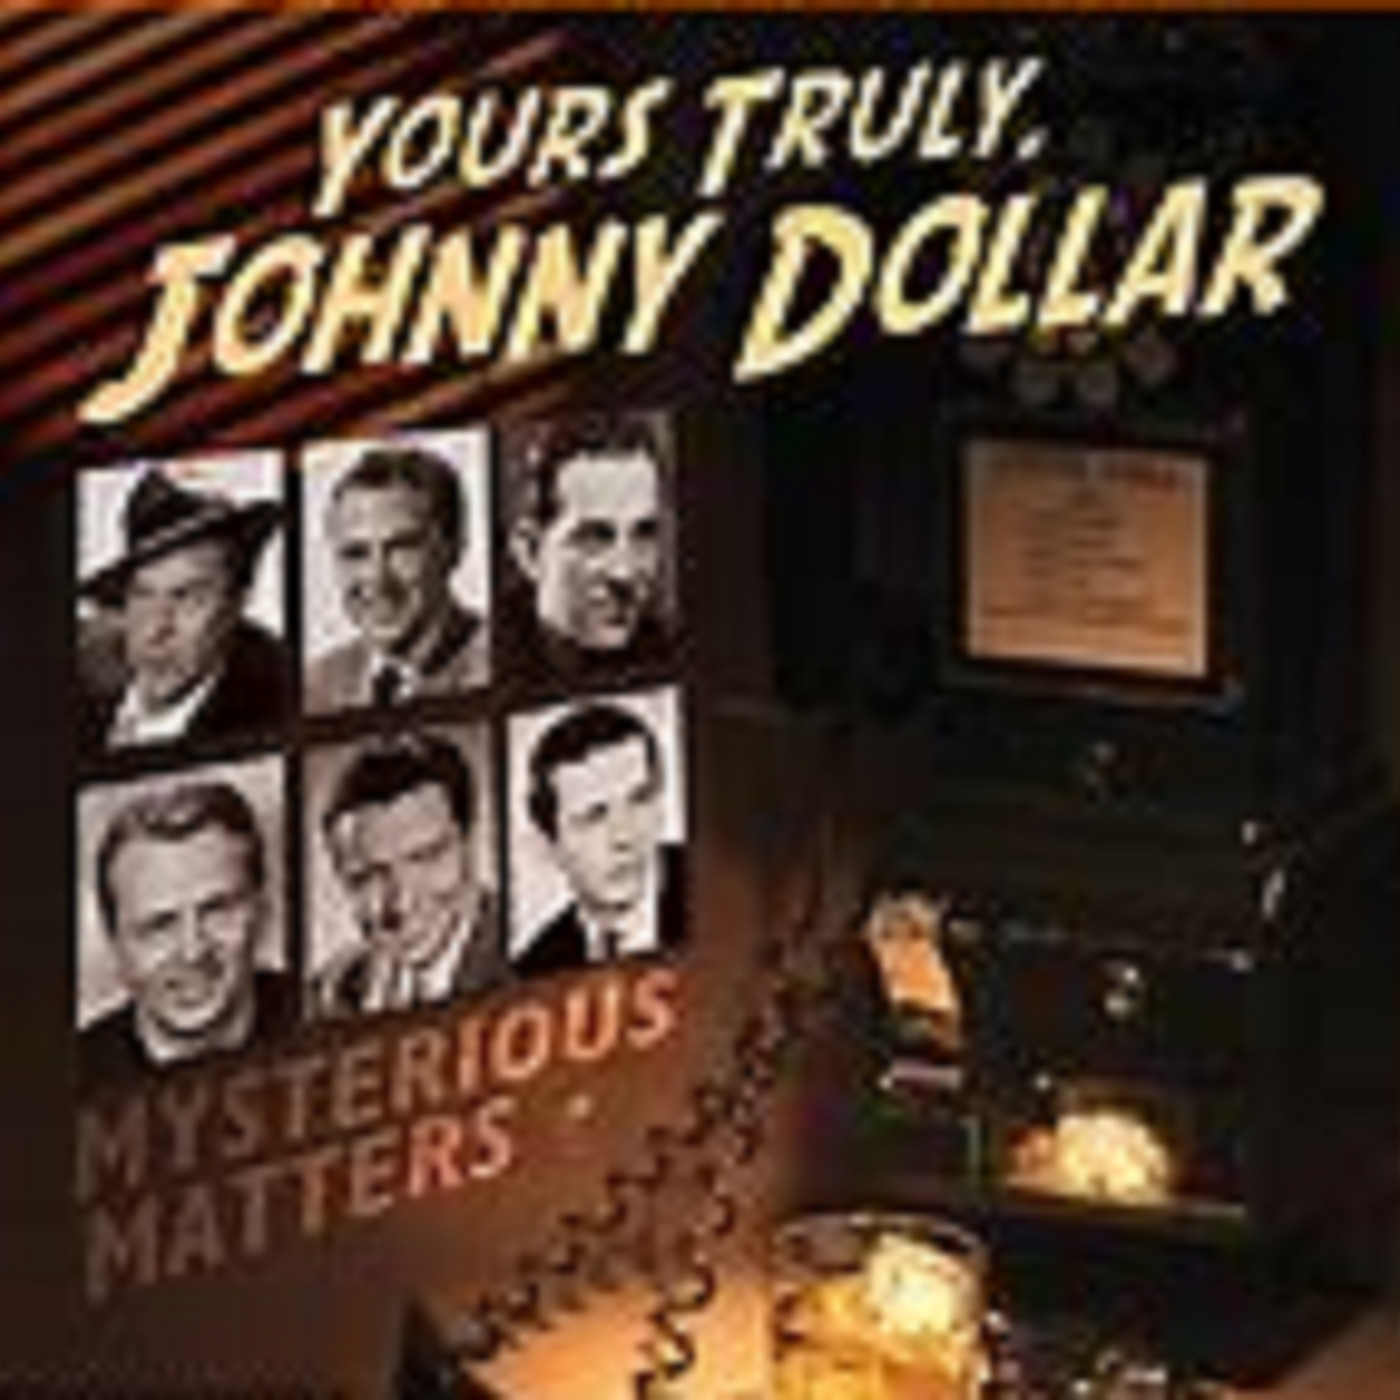 Yours Truly, Johnny Dollar - 092560, episode 707 - The Five Down Matter